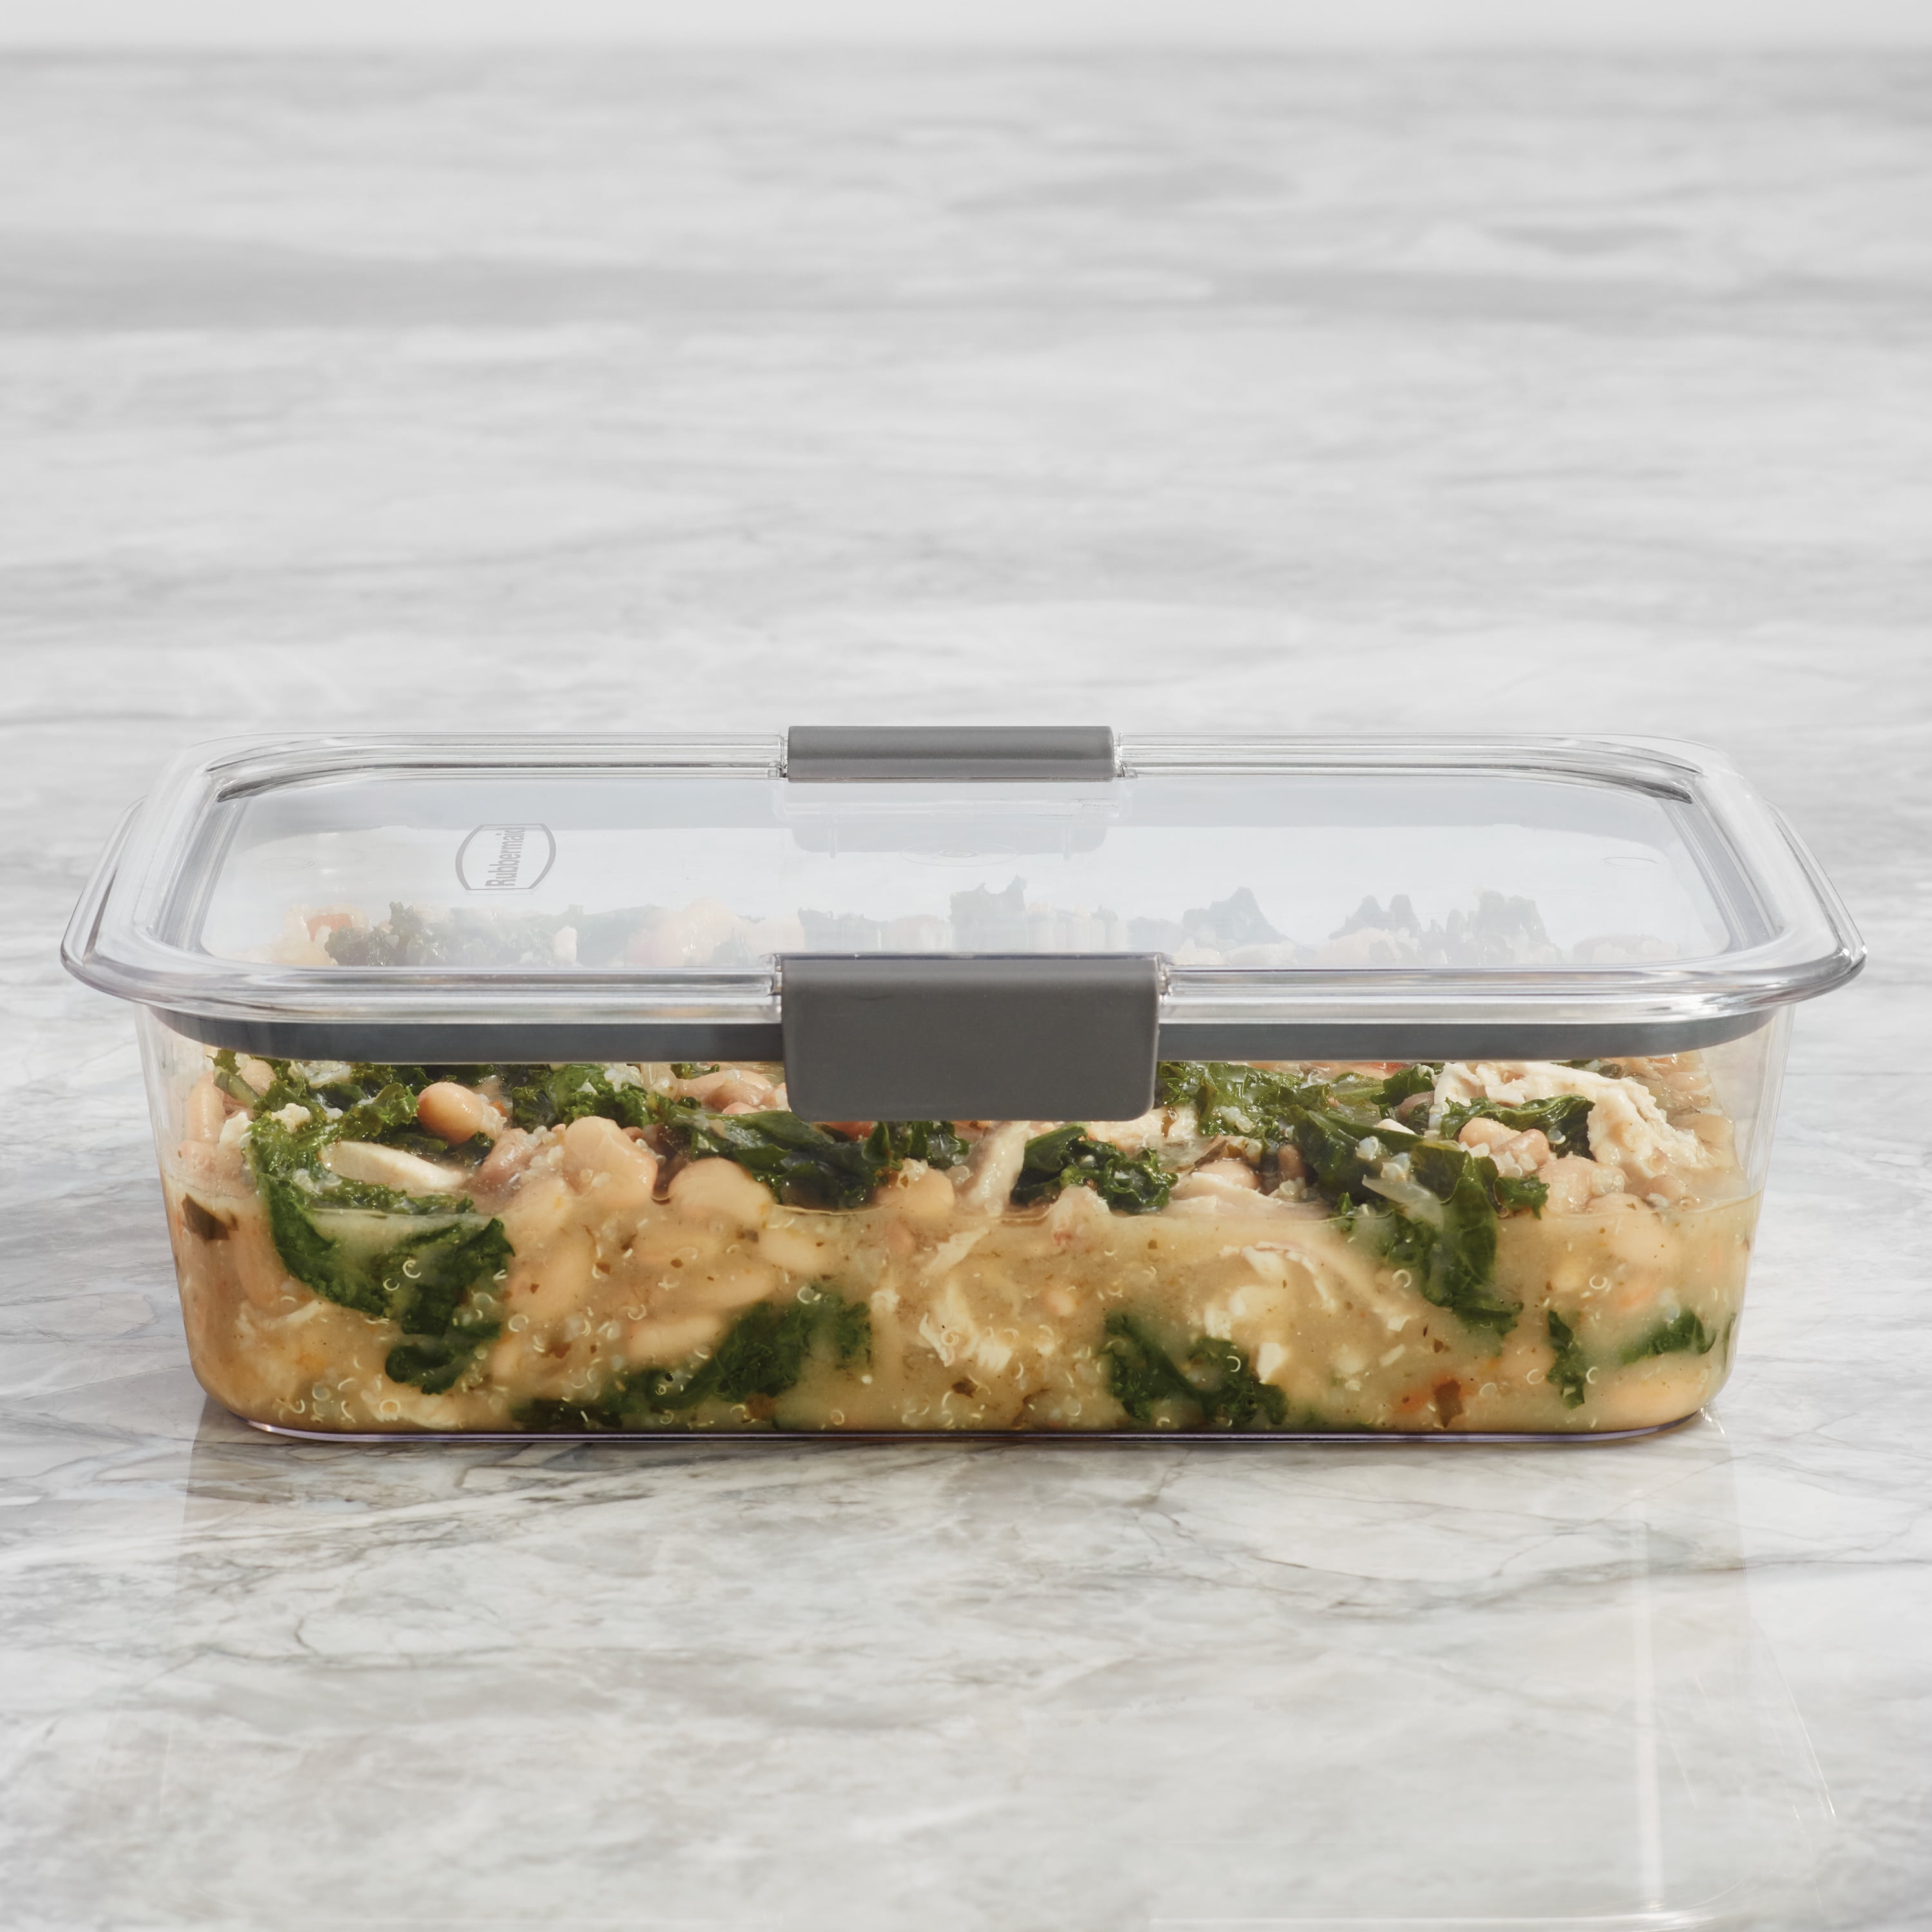 Rubbermaid Brilliance Food Storage Container - 2 Pack - Clear/Black, 9.6 c  - City Market